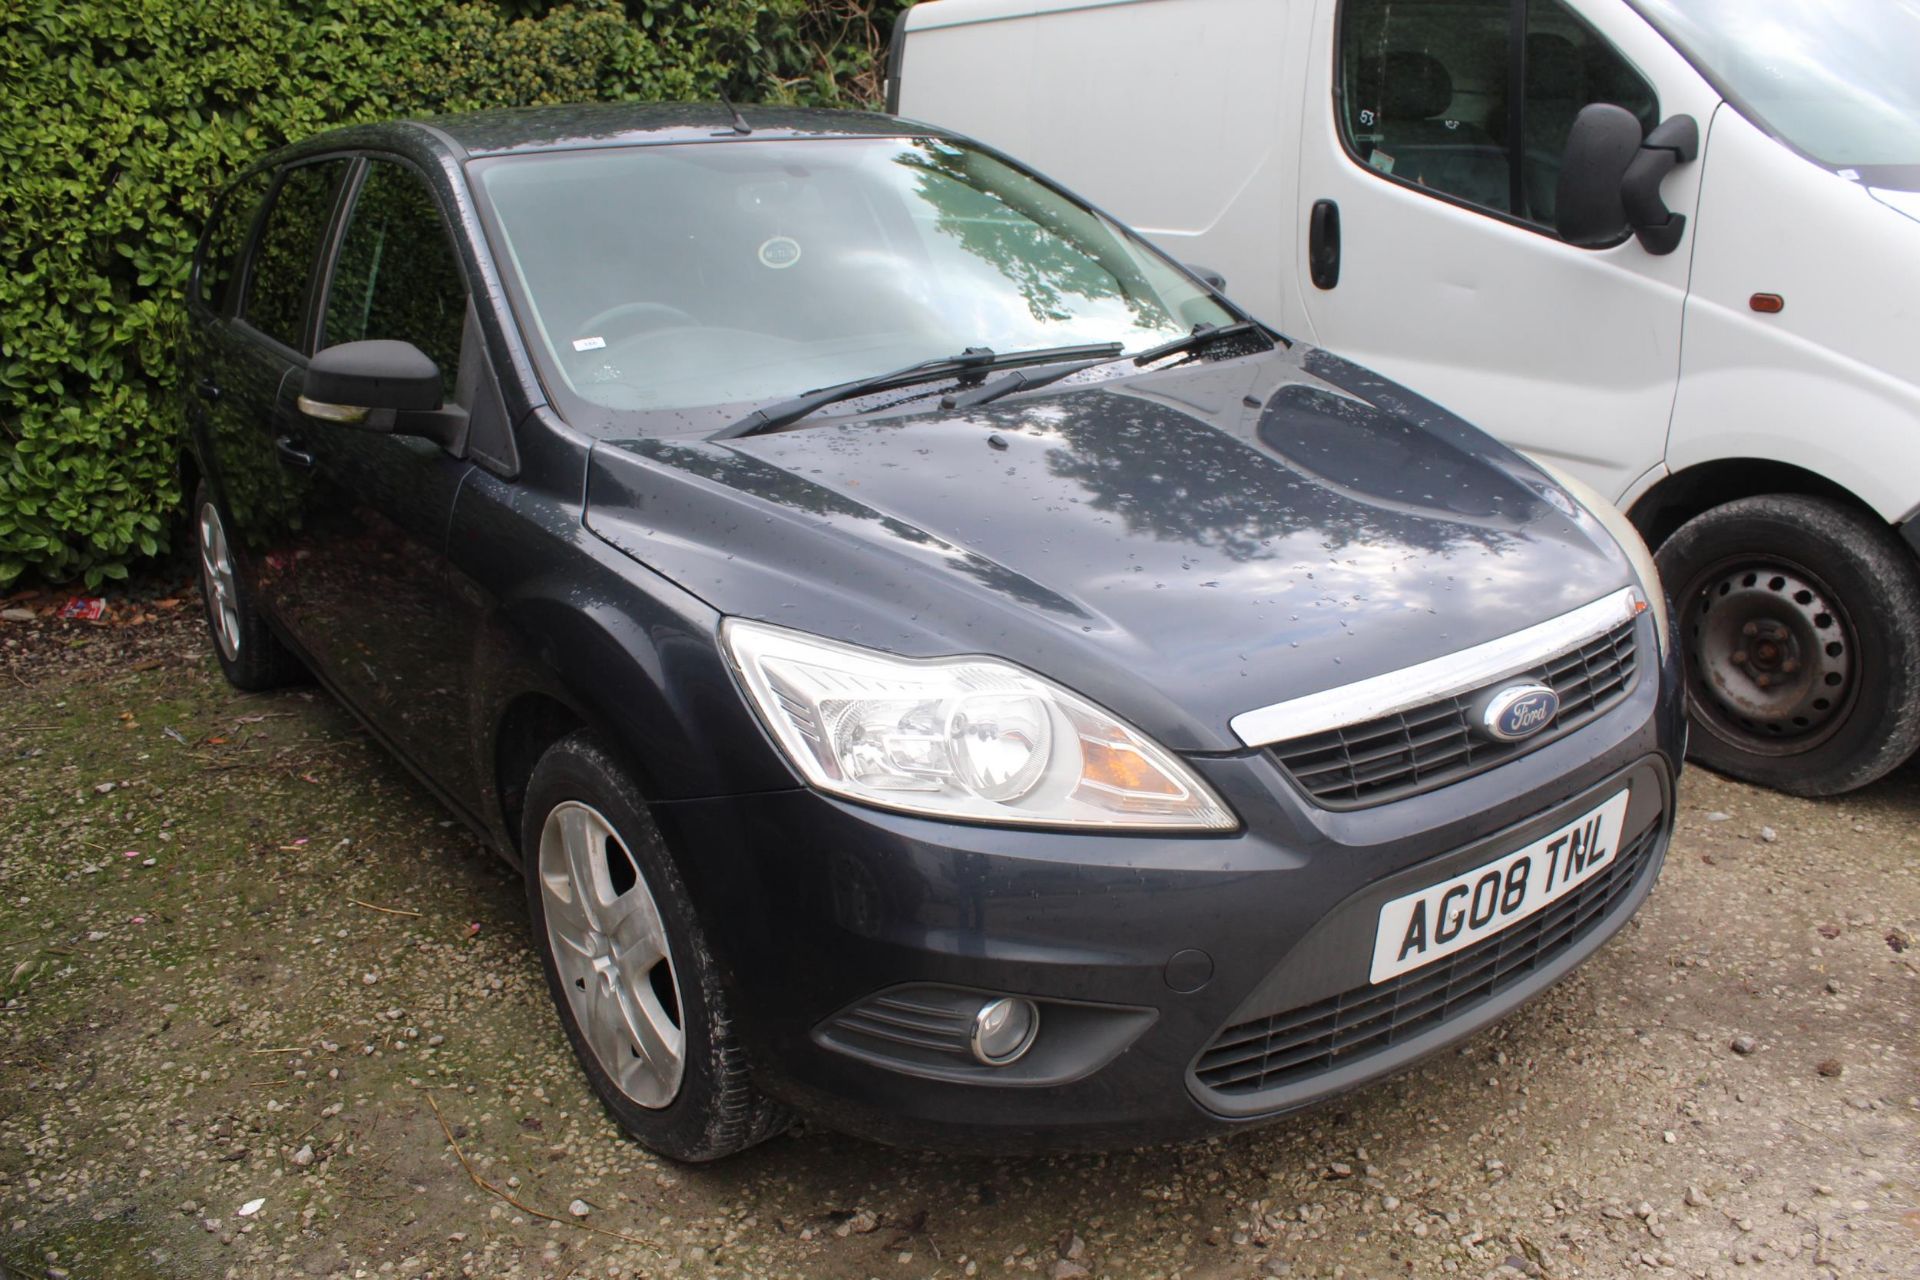 FORD FOCUS 1.6 ESTATE STYLE AG08TNL 85000 MILES 5 DOOR NO VAT WHILST ALL DESCRIPTIONS ARE GIVEN IN